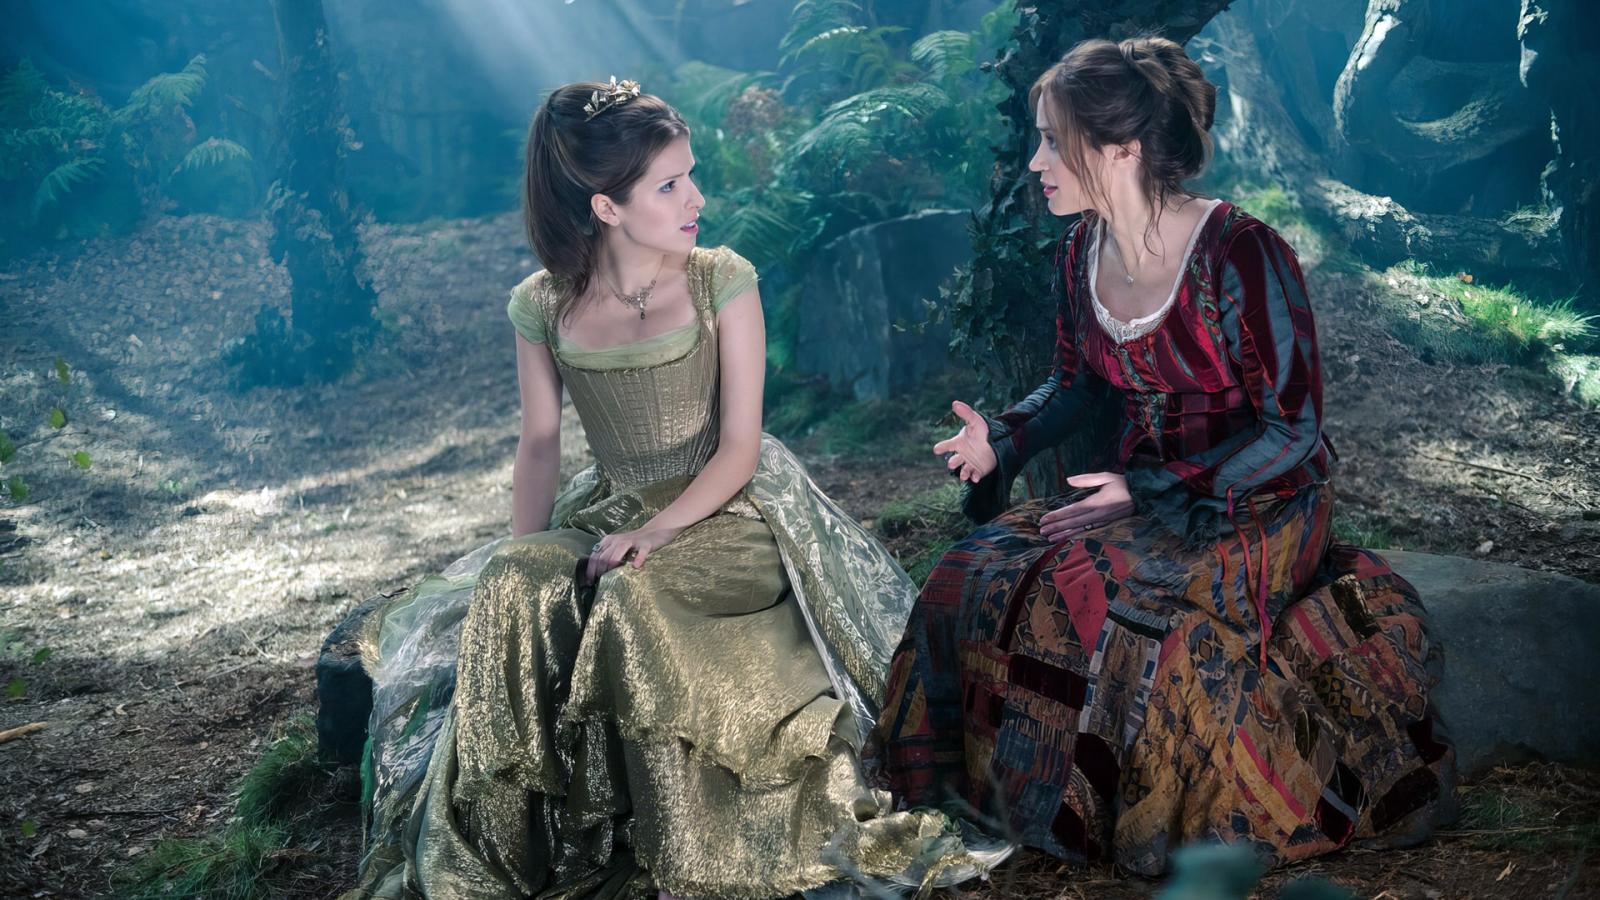 Anna Kendrick's 10 Best Roles After Twilight (and No, Pitch Perfect Not Included) - image 7